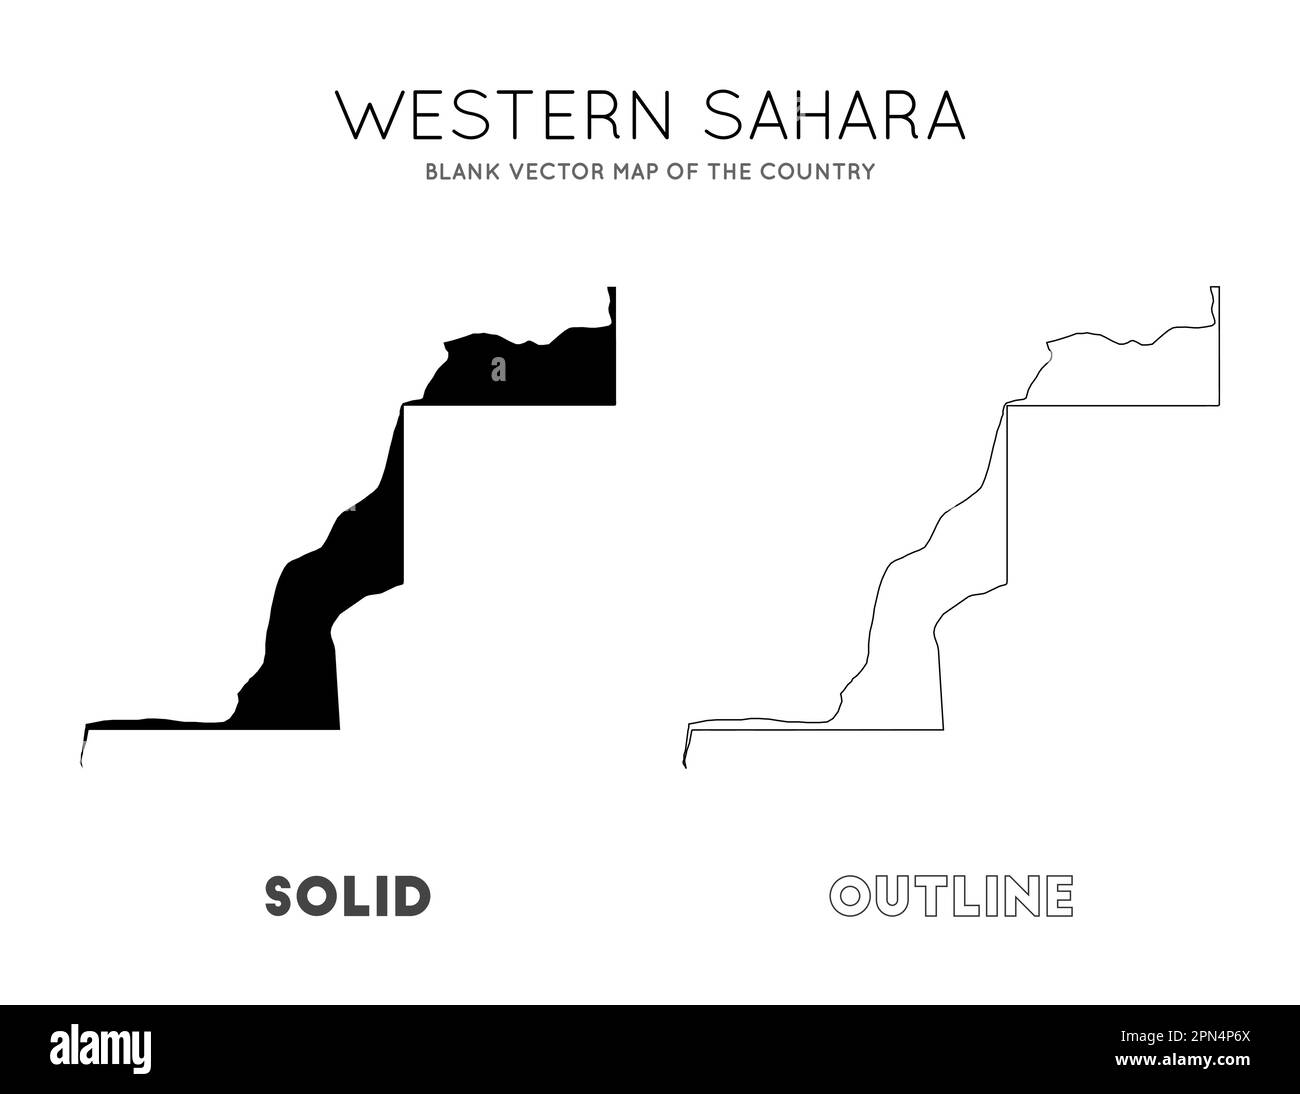 Western Sahara map. Blank vector map of the Country. Borders of Western Sahara for your infographic. Vector illustration. Stock Vector